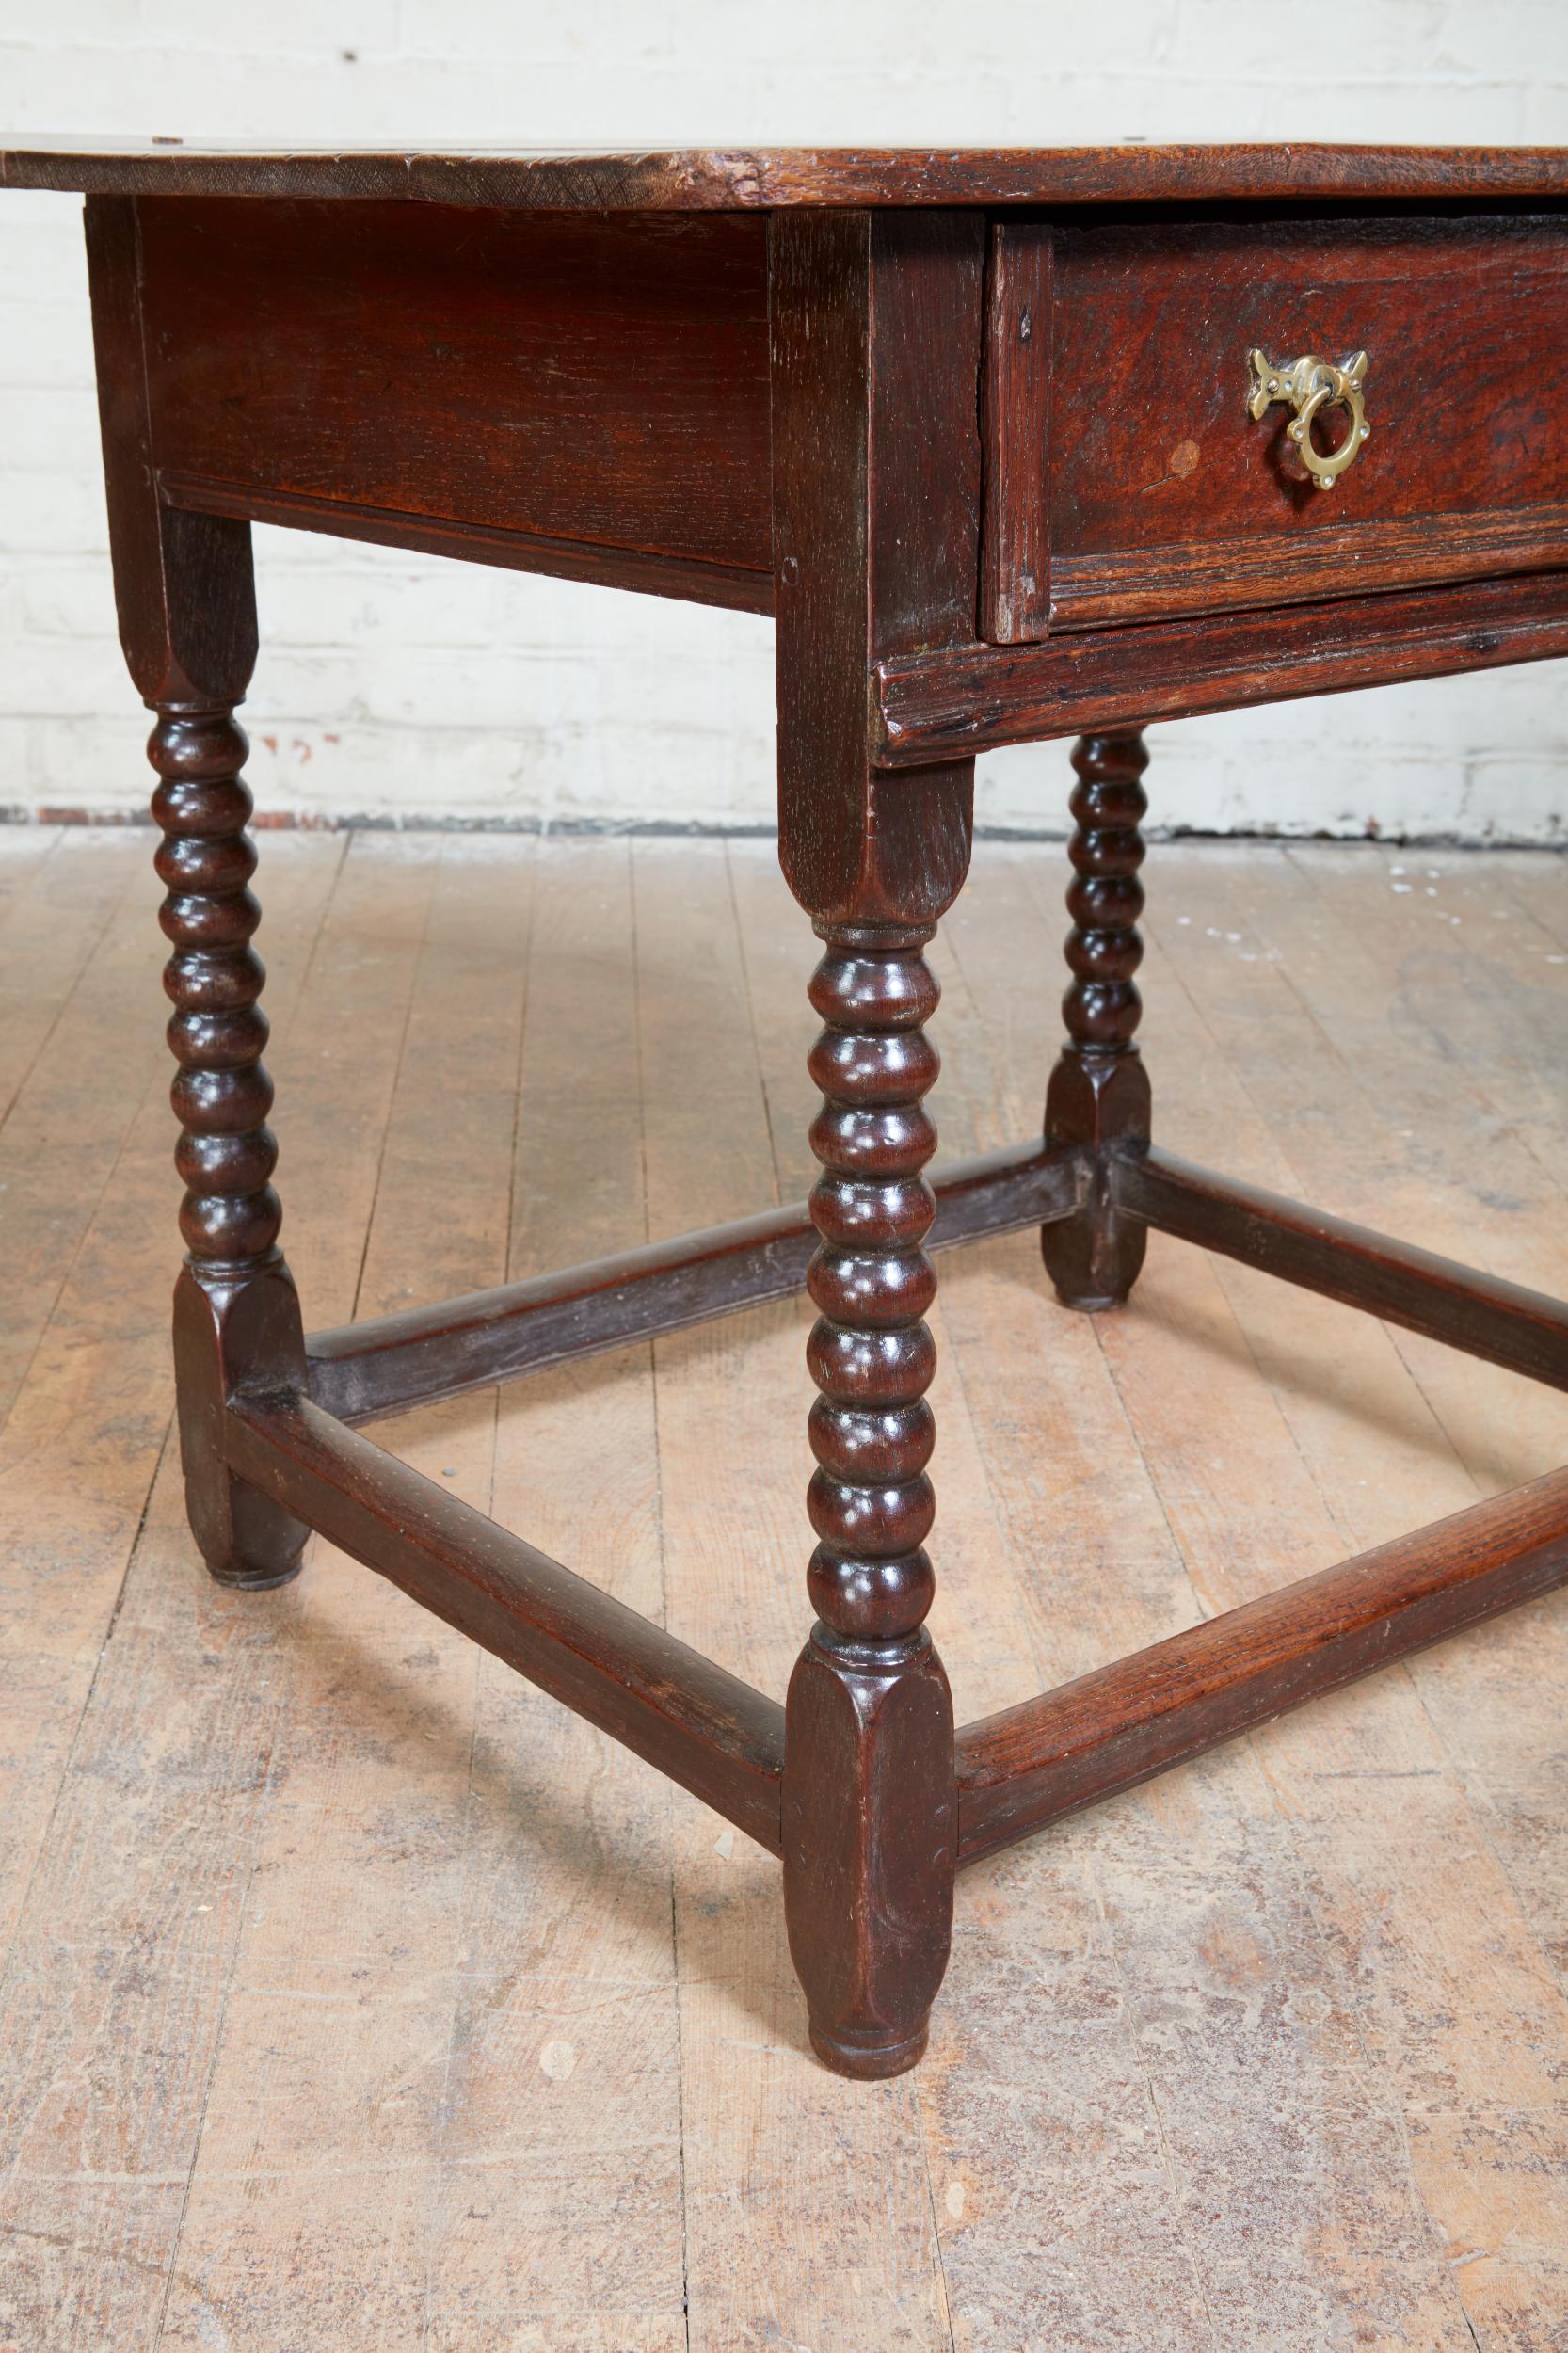 Good Charles II English oak table, the richly patinated three plank top over single drawer with applied block molded edges, standing on boldly turned legs joined by box stretchers, the whole with good patina and rich color.